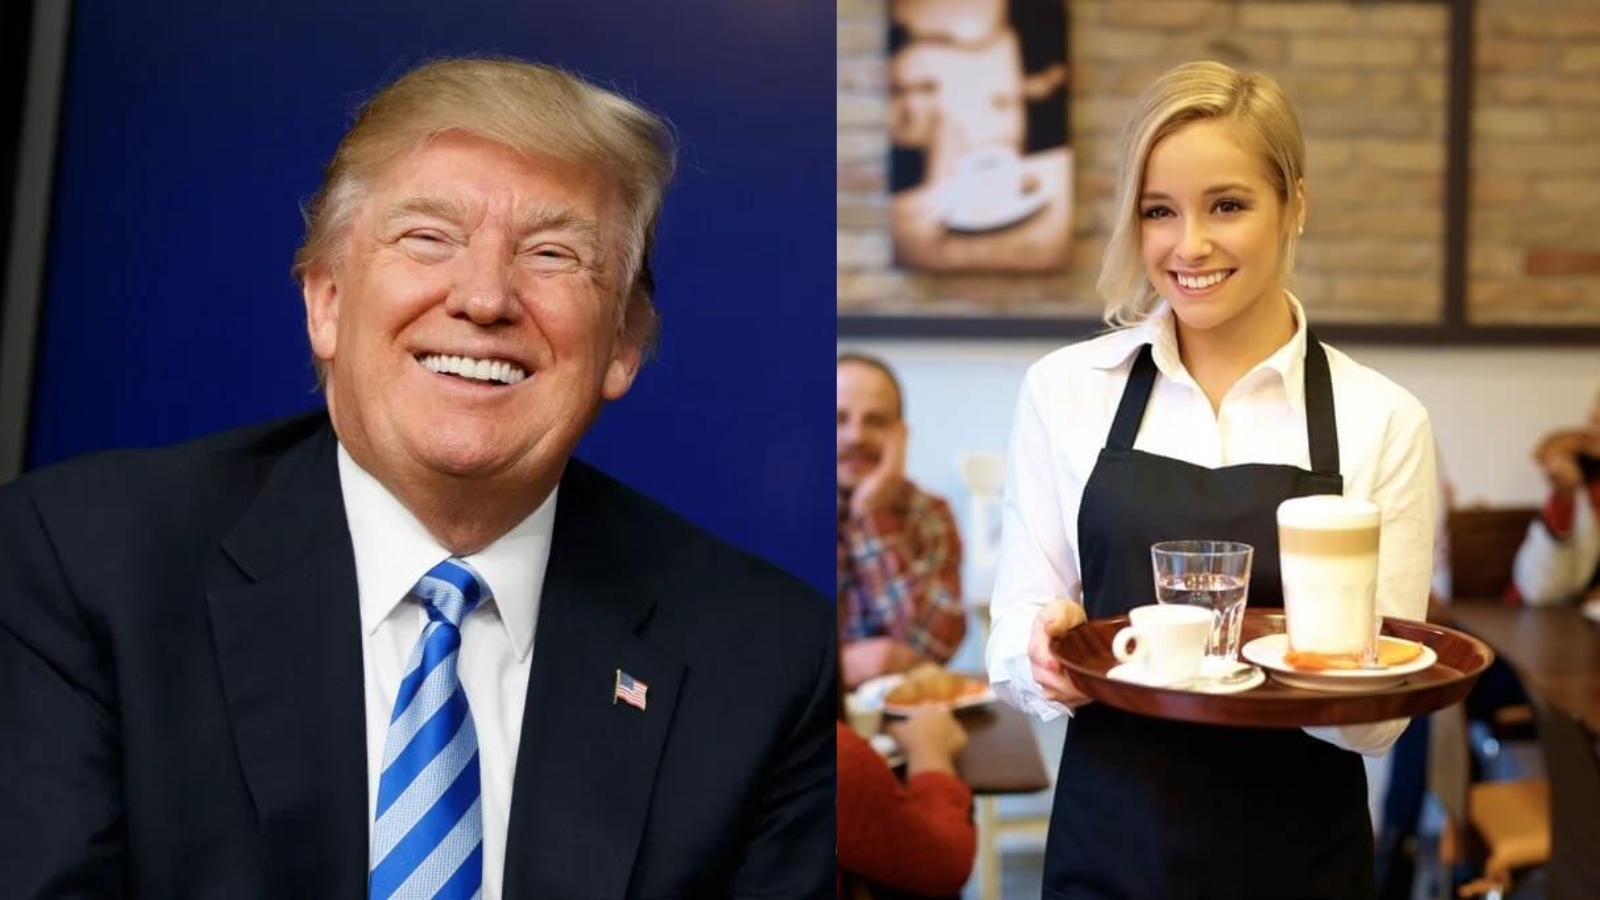 President Trump Will Eliminate Taxes on Tips for Service Employees. If You Think that’s a Great Idea, Here’s How to Supercharge It!